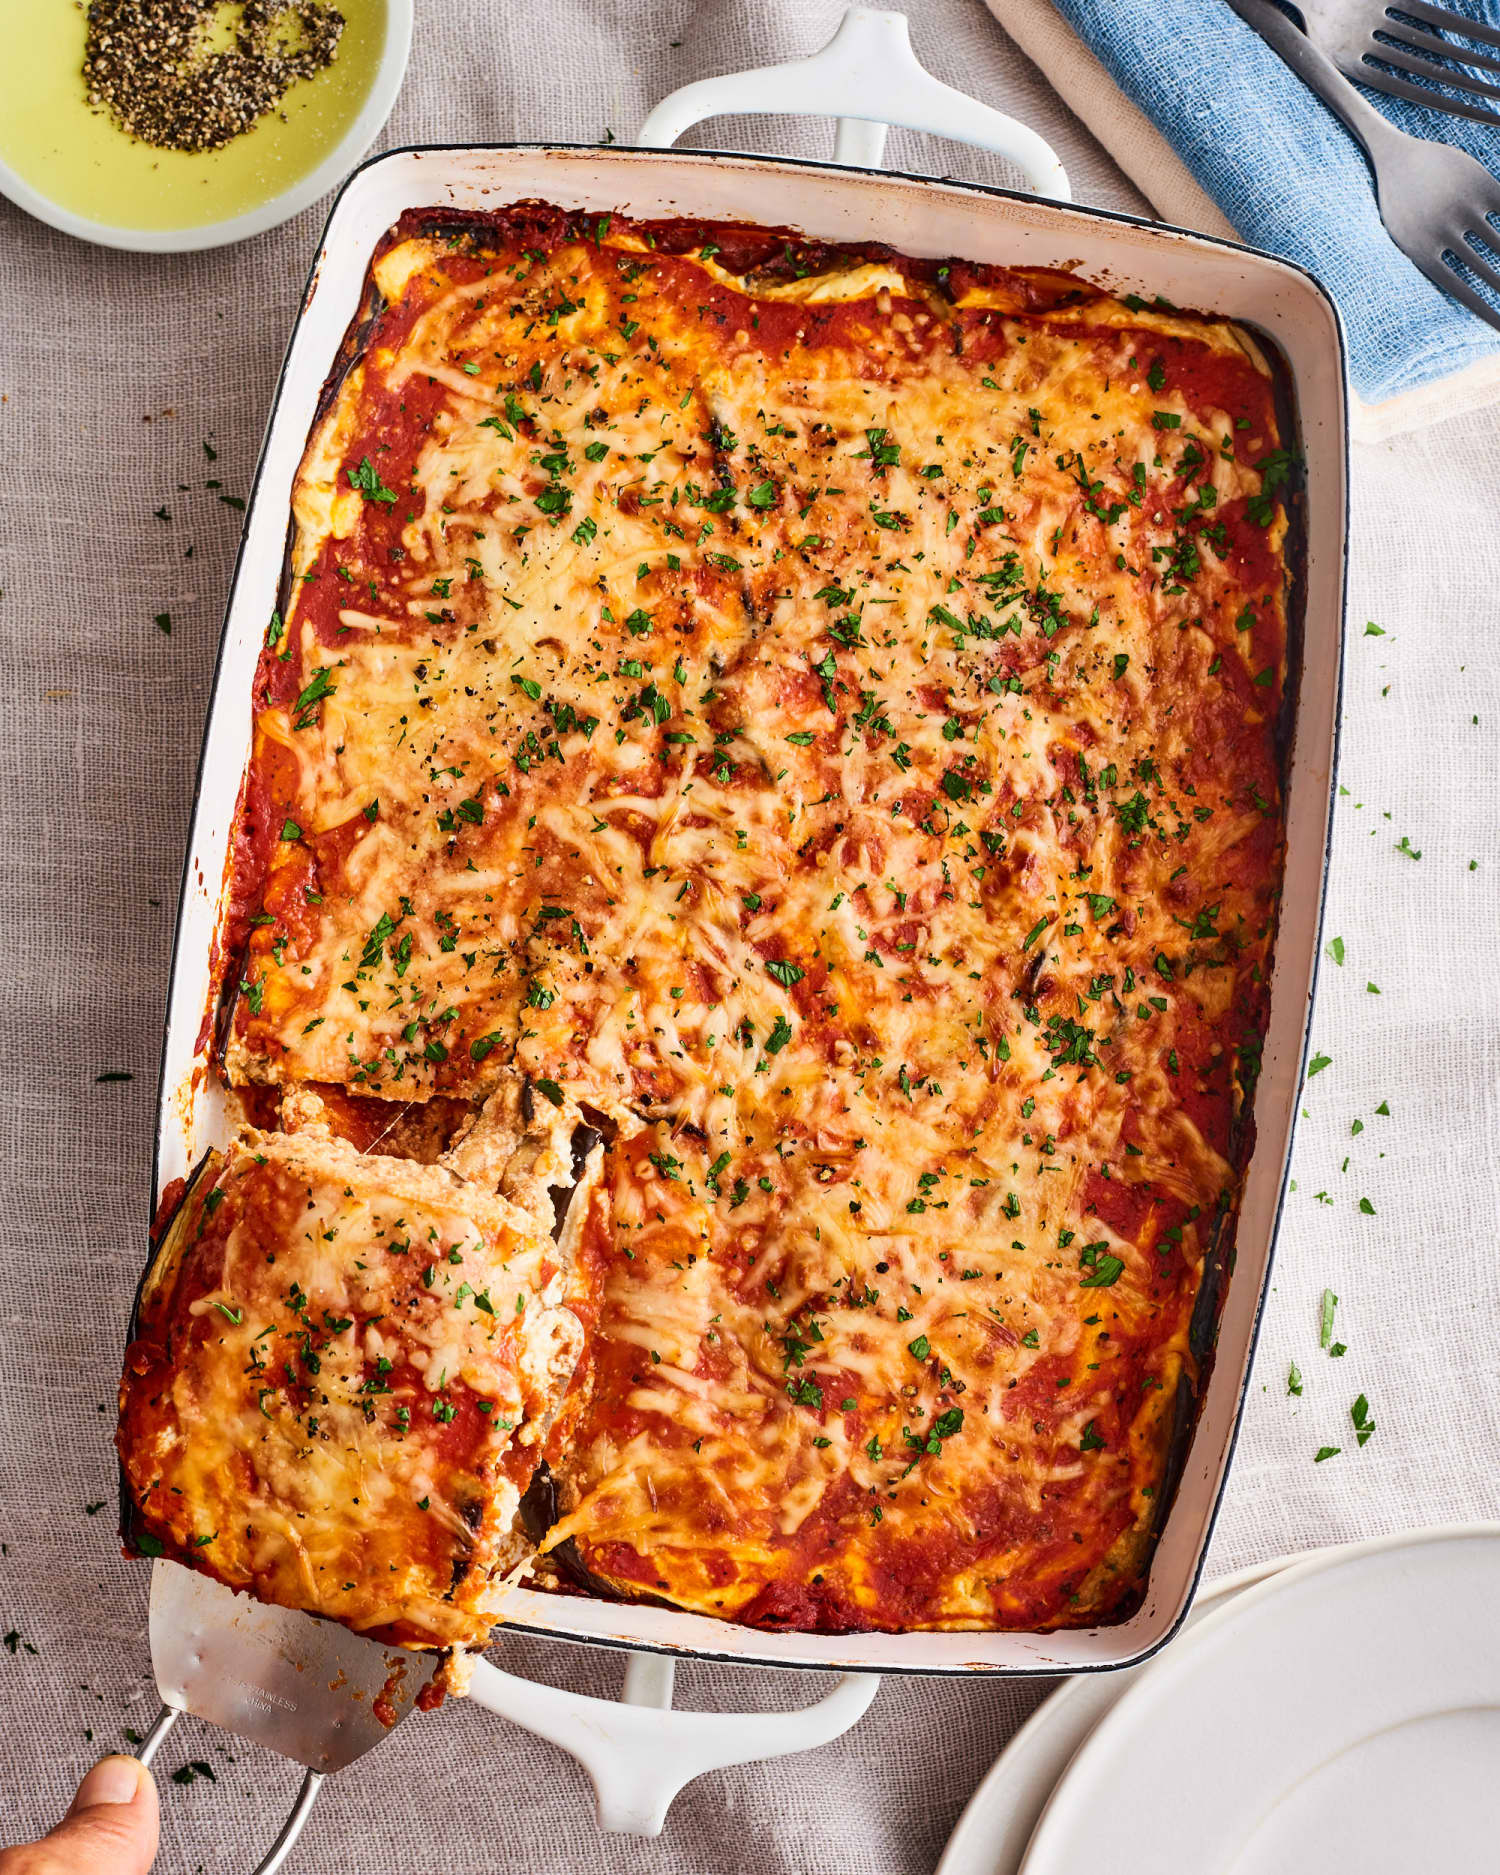 how to make a vegetarian lasagna with eggplant